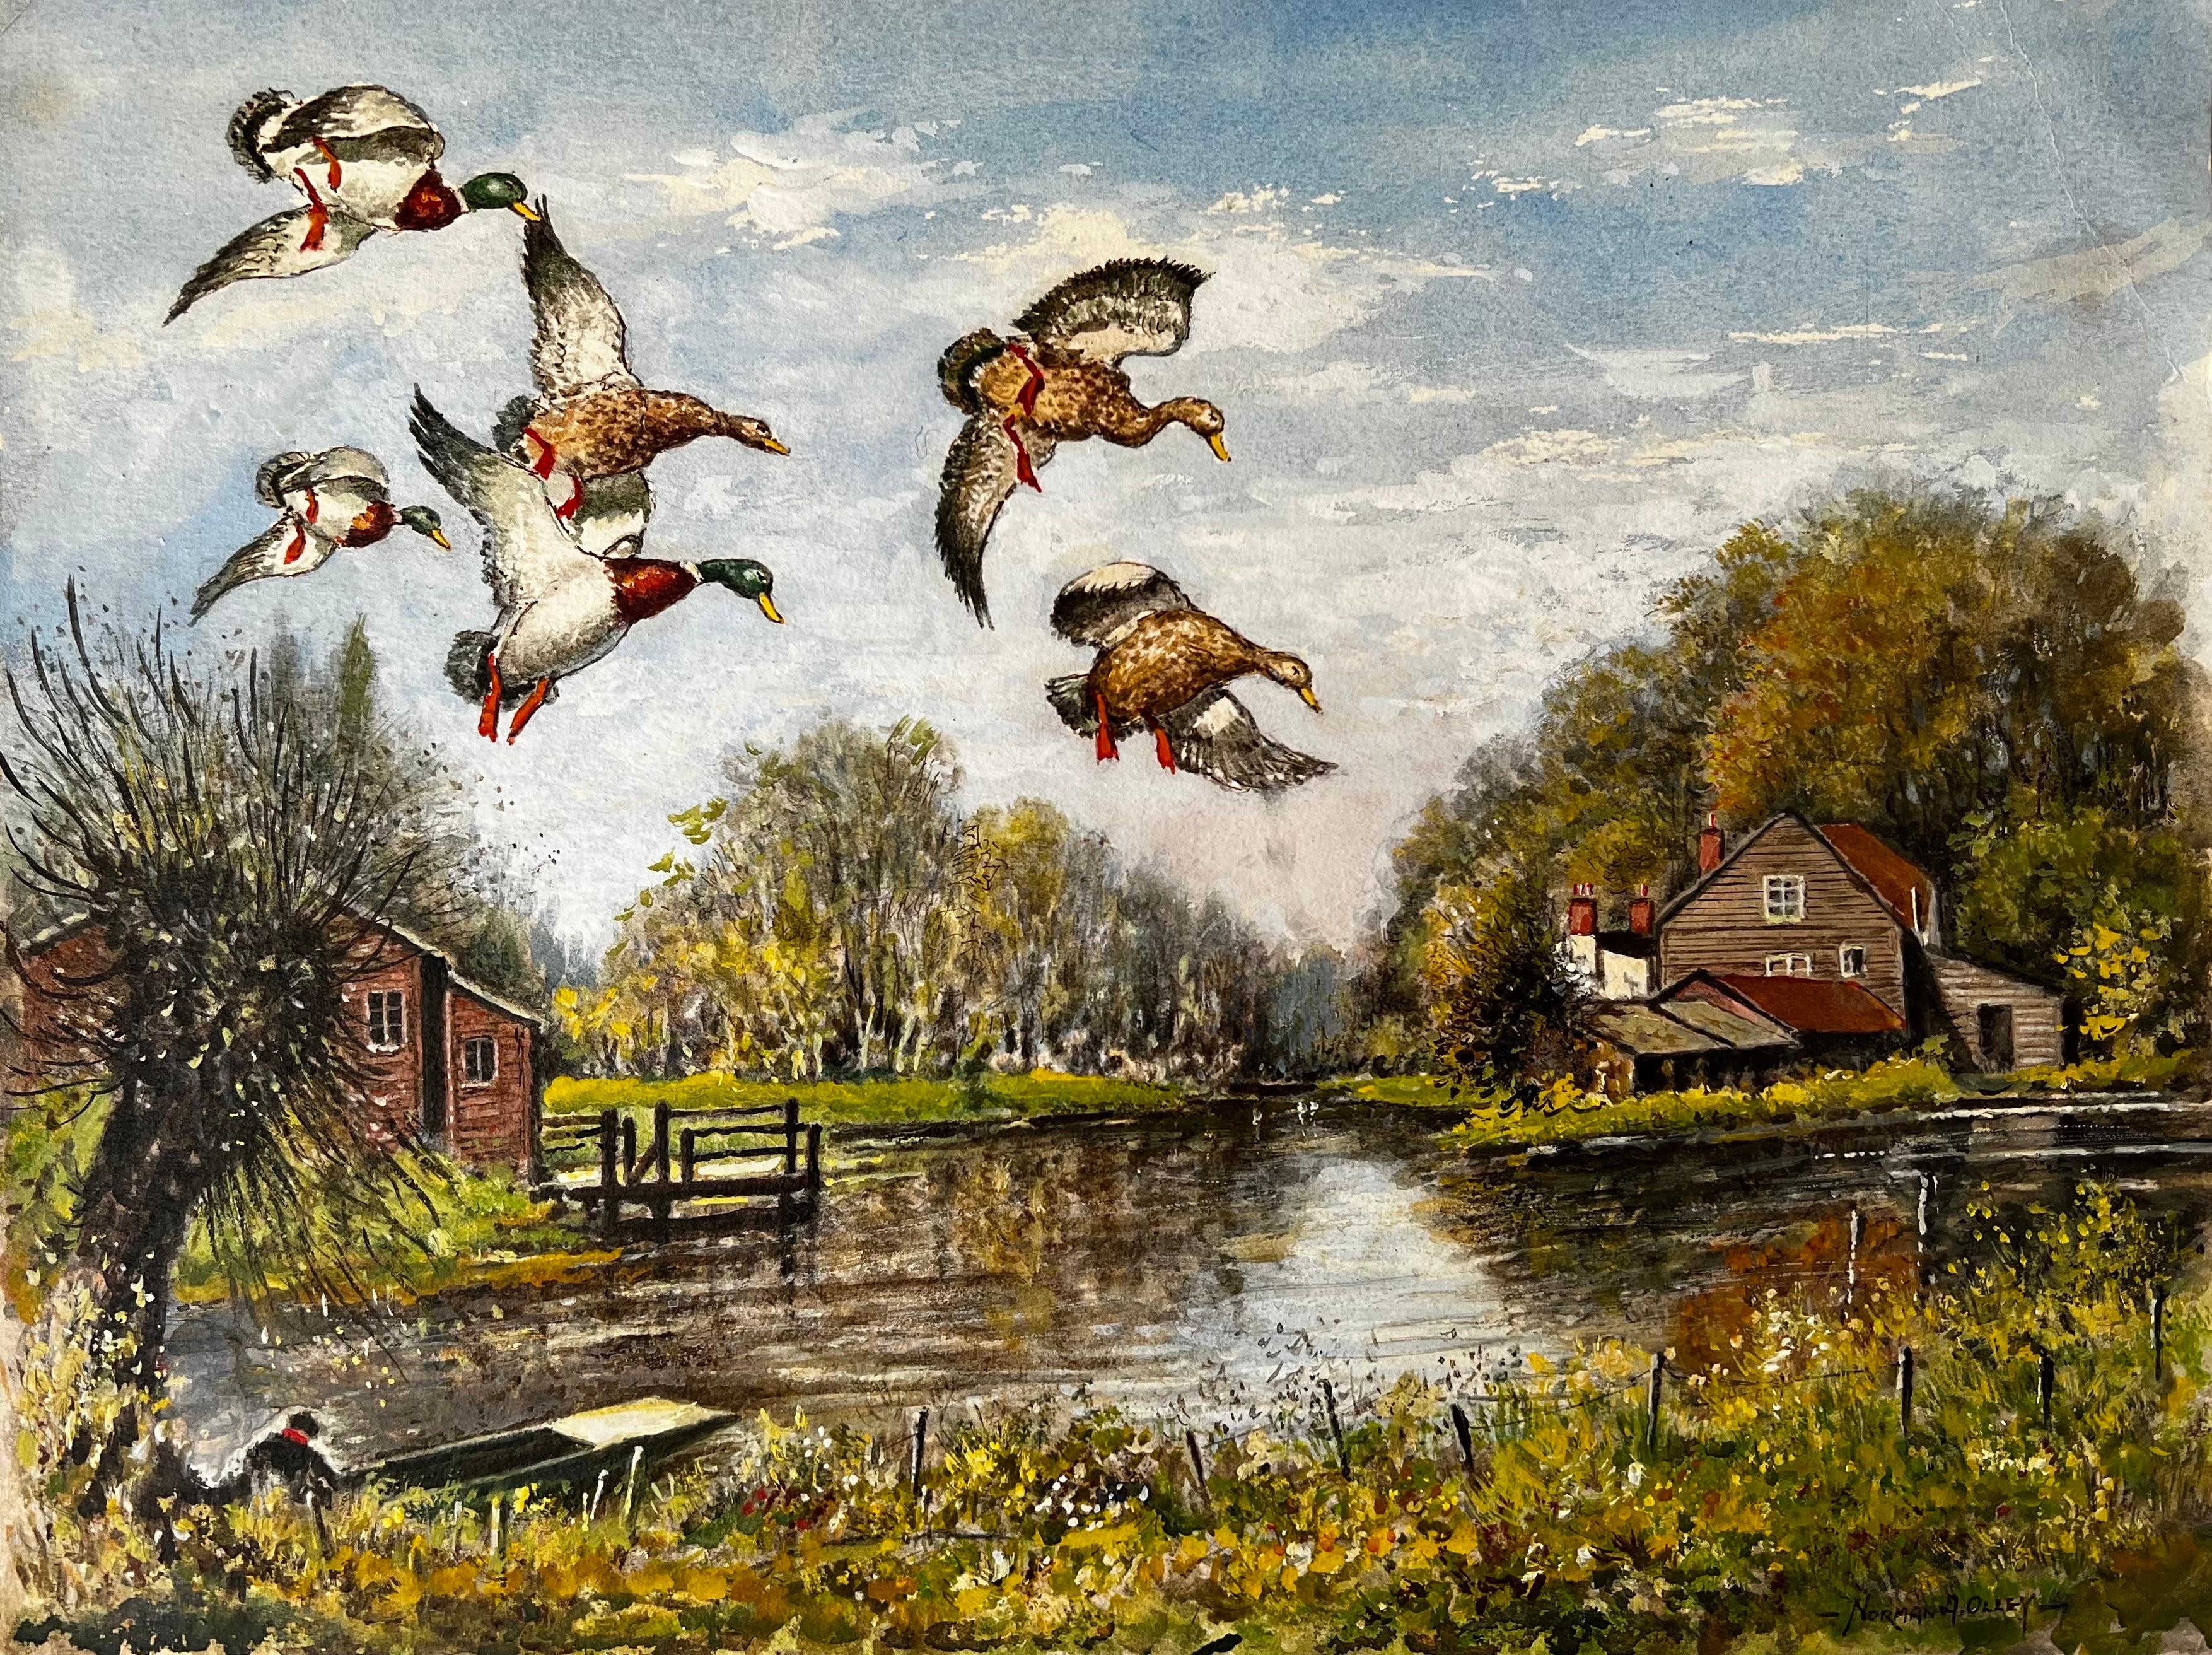 Mallard Ducks Dropping into The Ember Surrey River - Painting by Norman A Olley